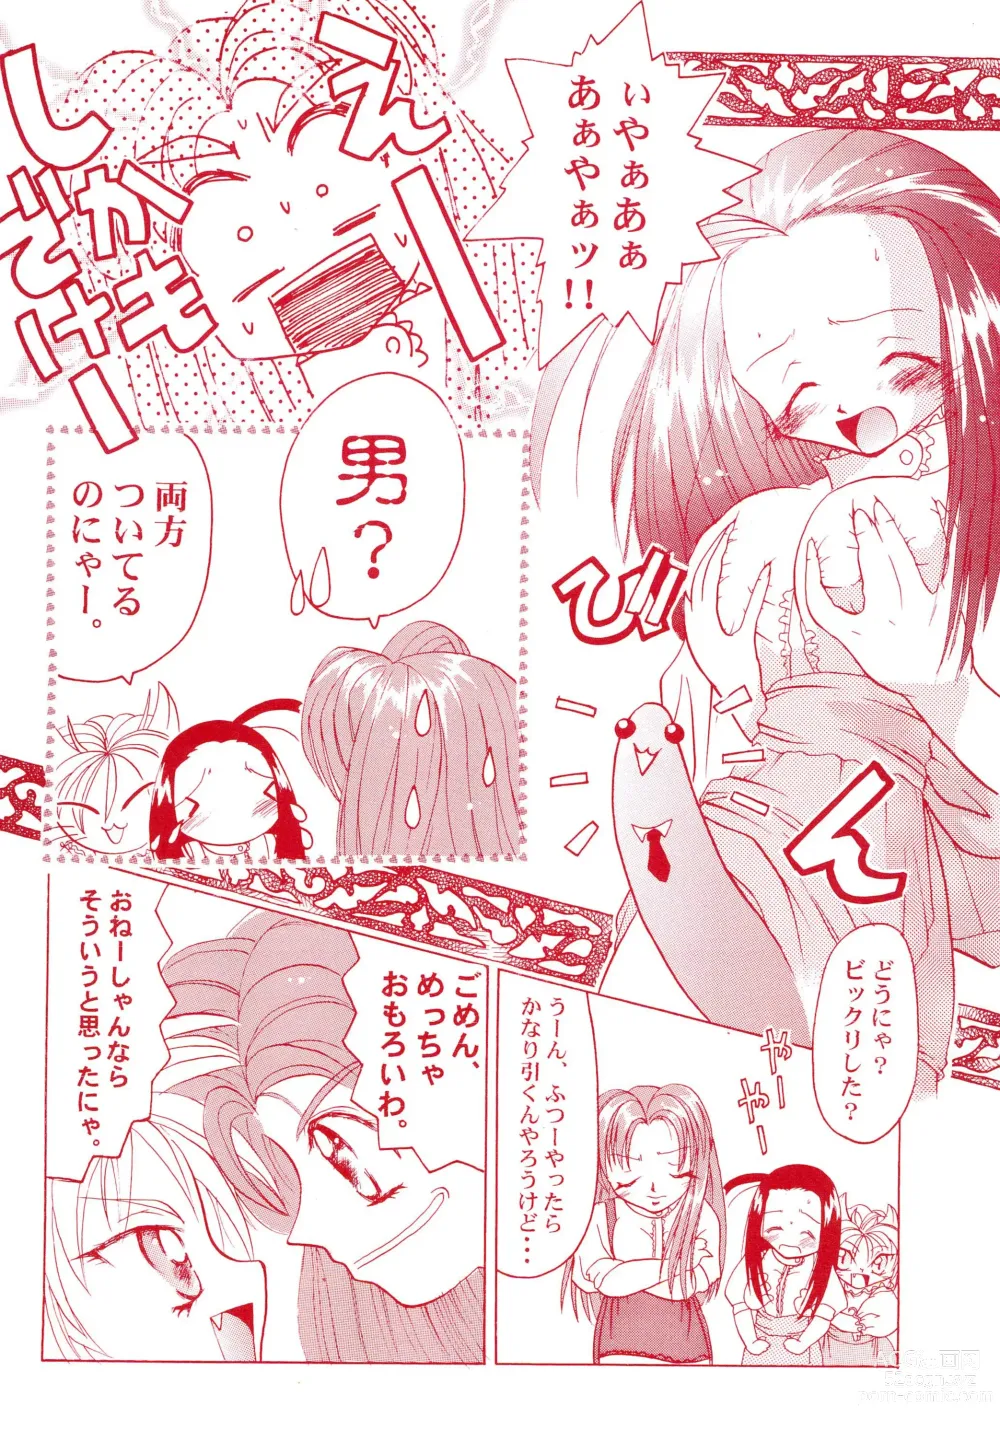 Page 18 of doujinshi Get Sweet ”A” Low Phone Anna Mirrors ORIGINAL STORY